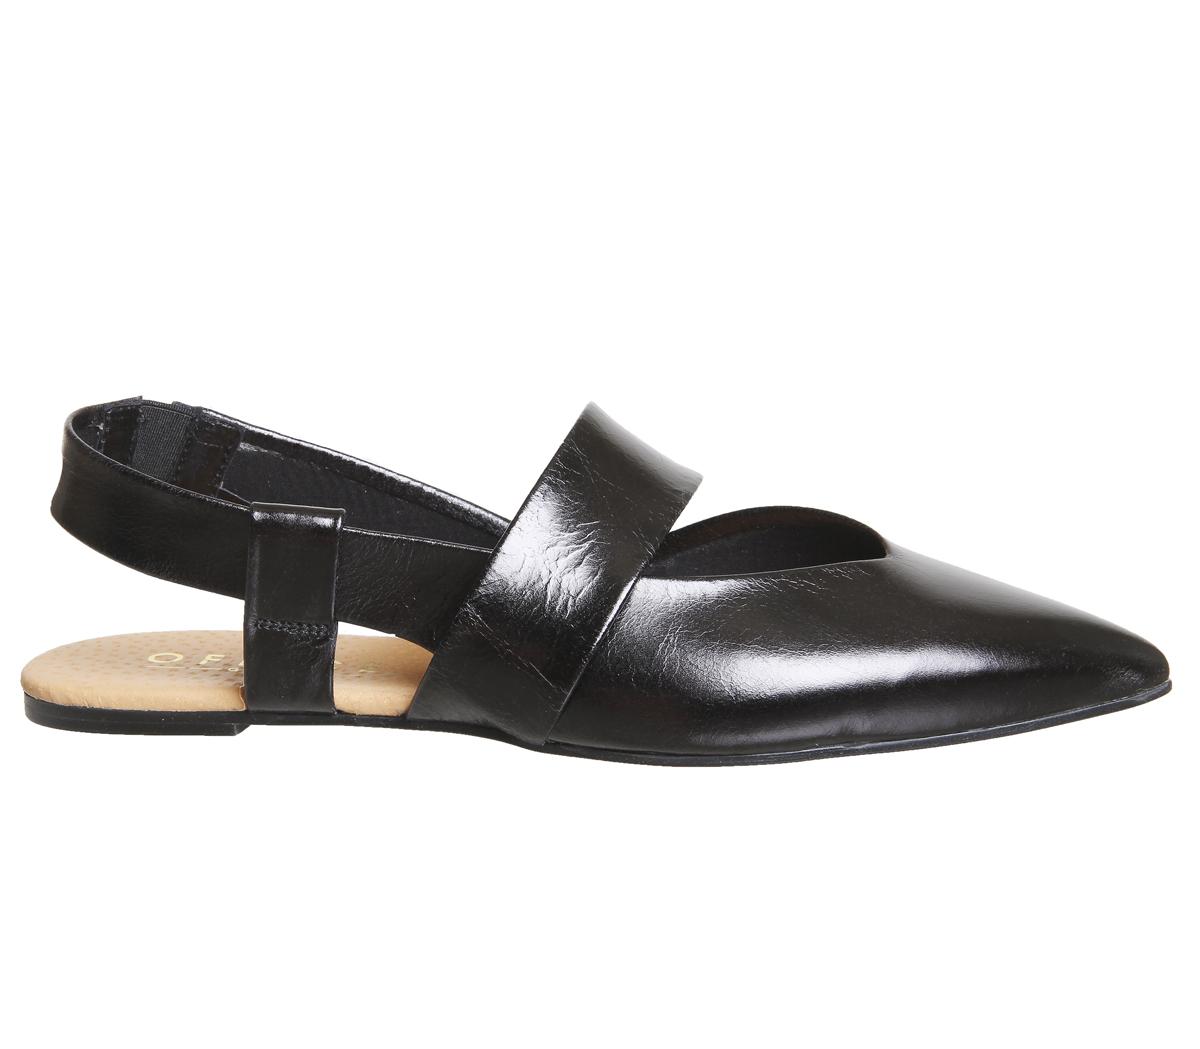 Office Fashion Point Flats Black Leather - Flat Shoes for Women